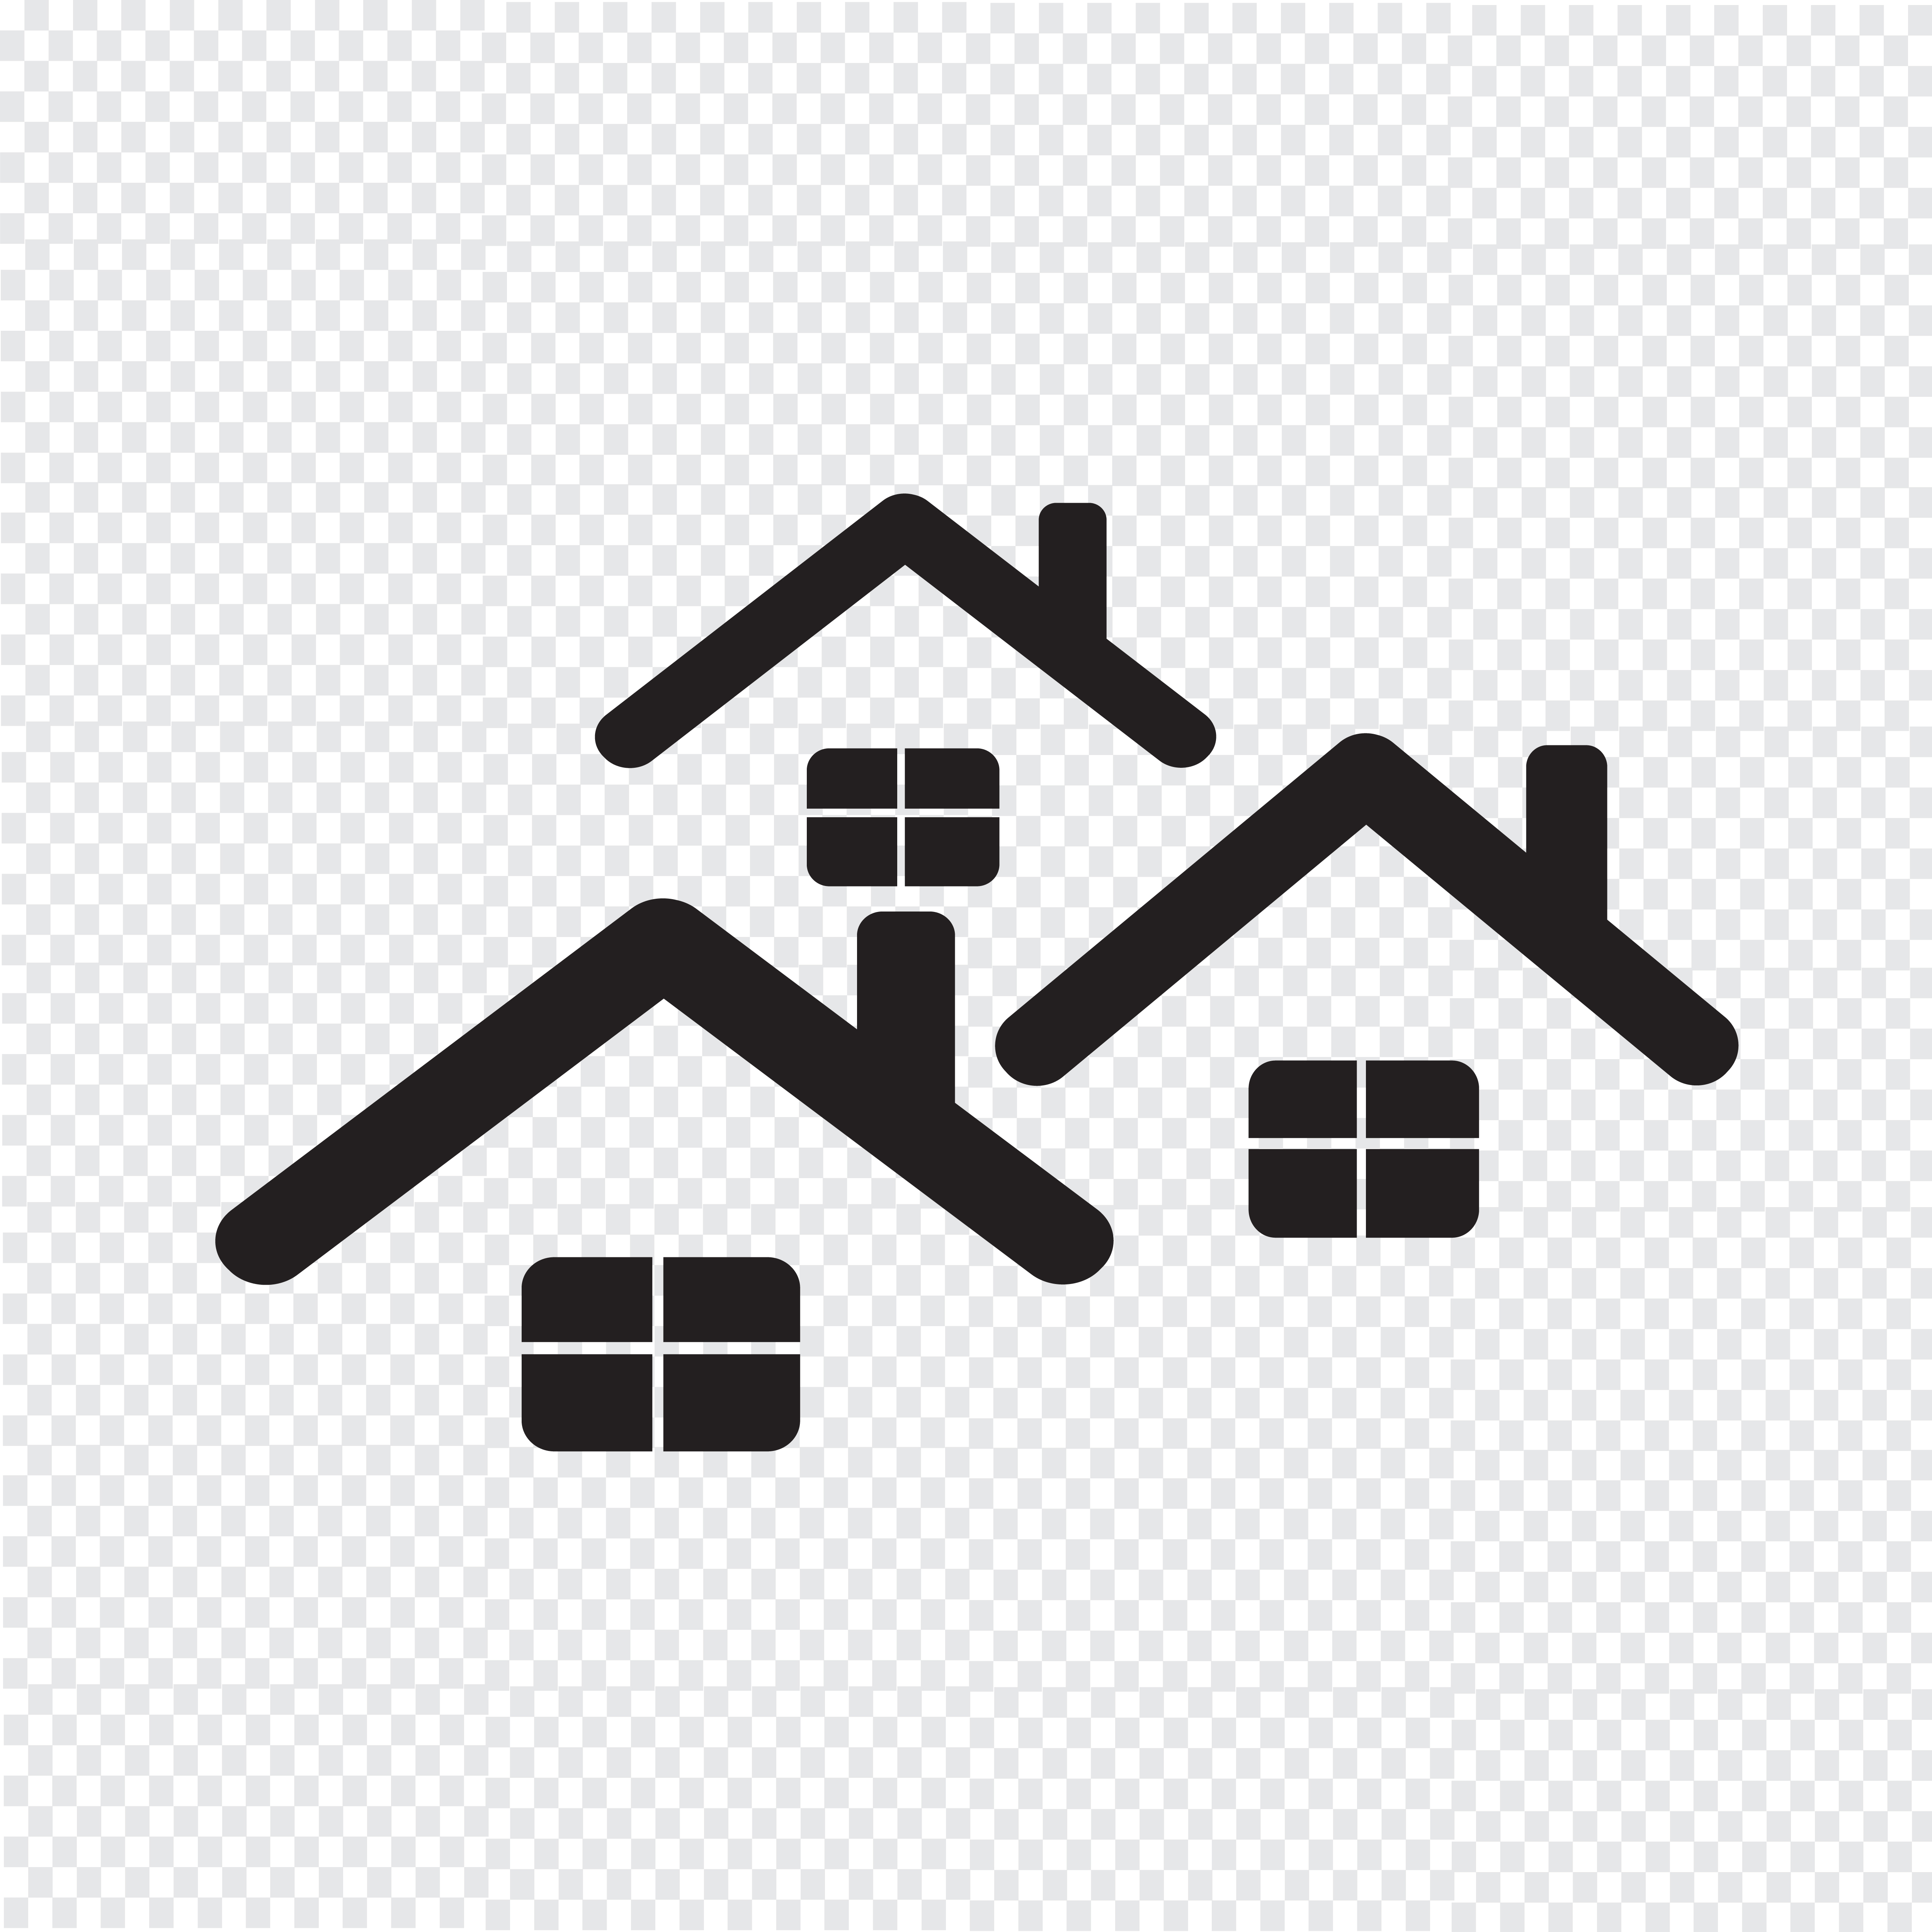 Download Home icon symbol sign - Download Free Vectors, Clipart ...